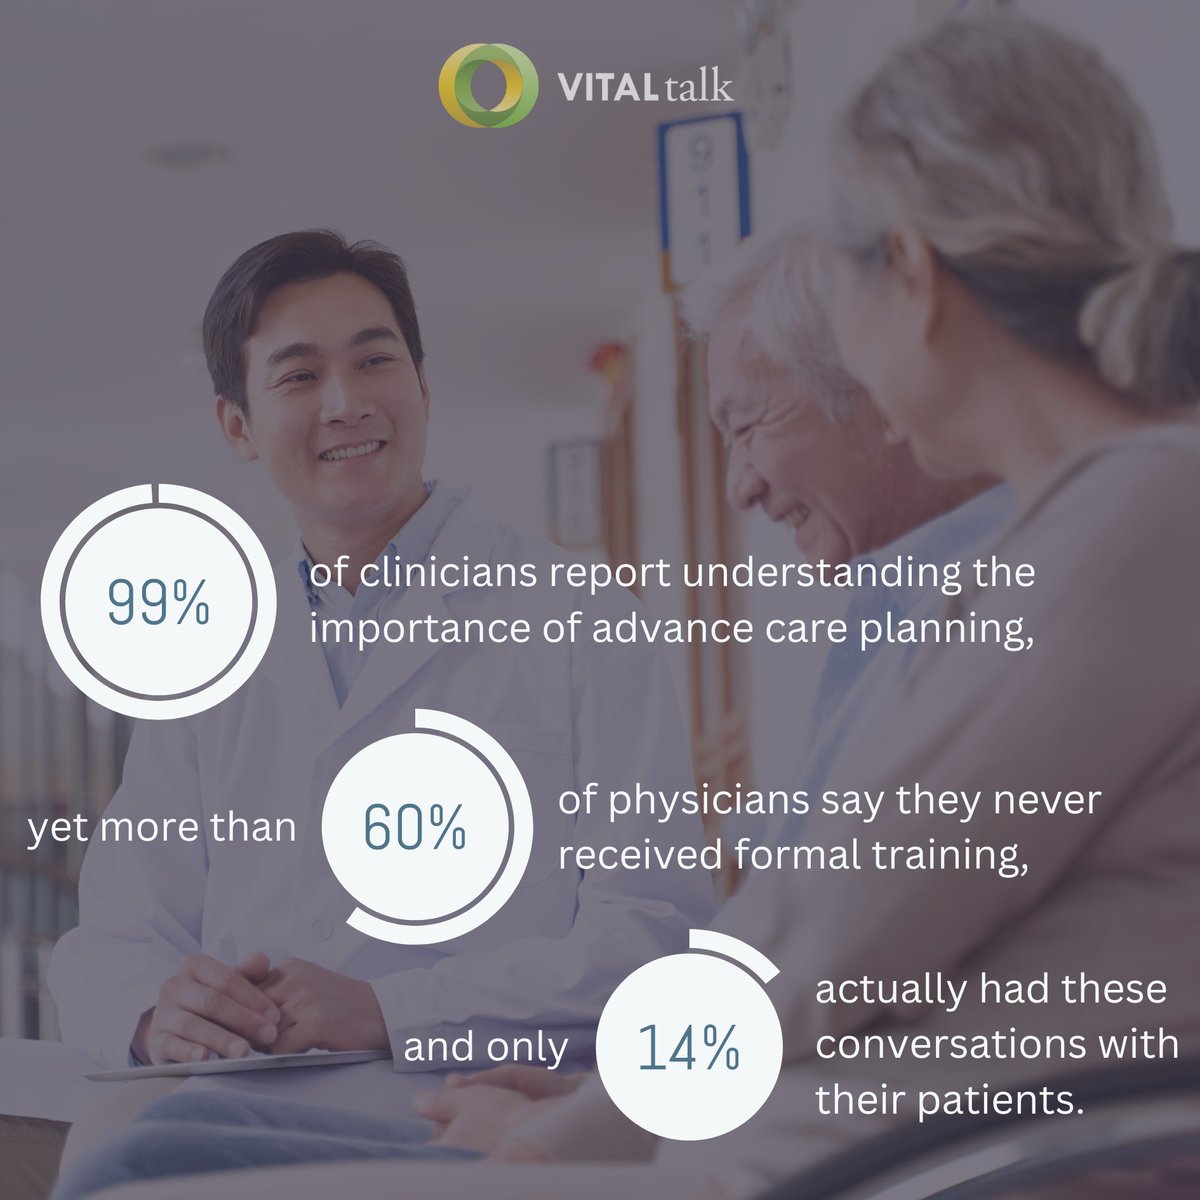 VitalTalk aims to bridge this gap and turn awareness into action. Our programs equip clinicians with the skills and confidence to navigate advance care planning discussions and ensure patient’s wishes are accurately reflected in treatment. #VitalTalk #AdvanceCarePlanning